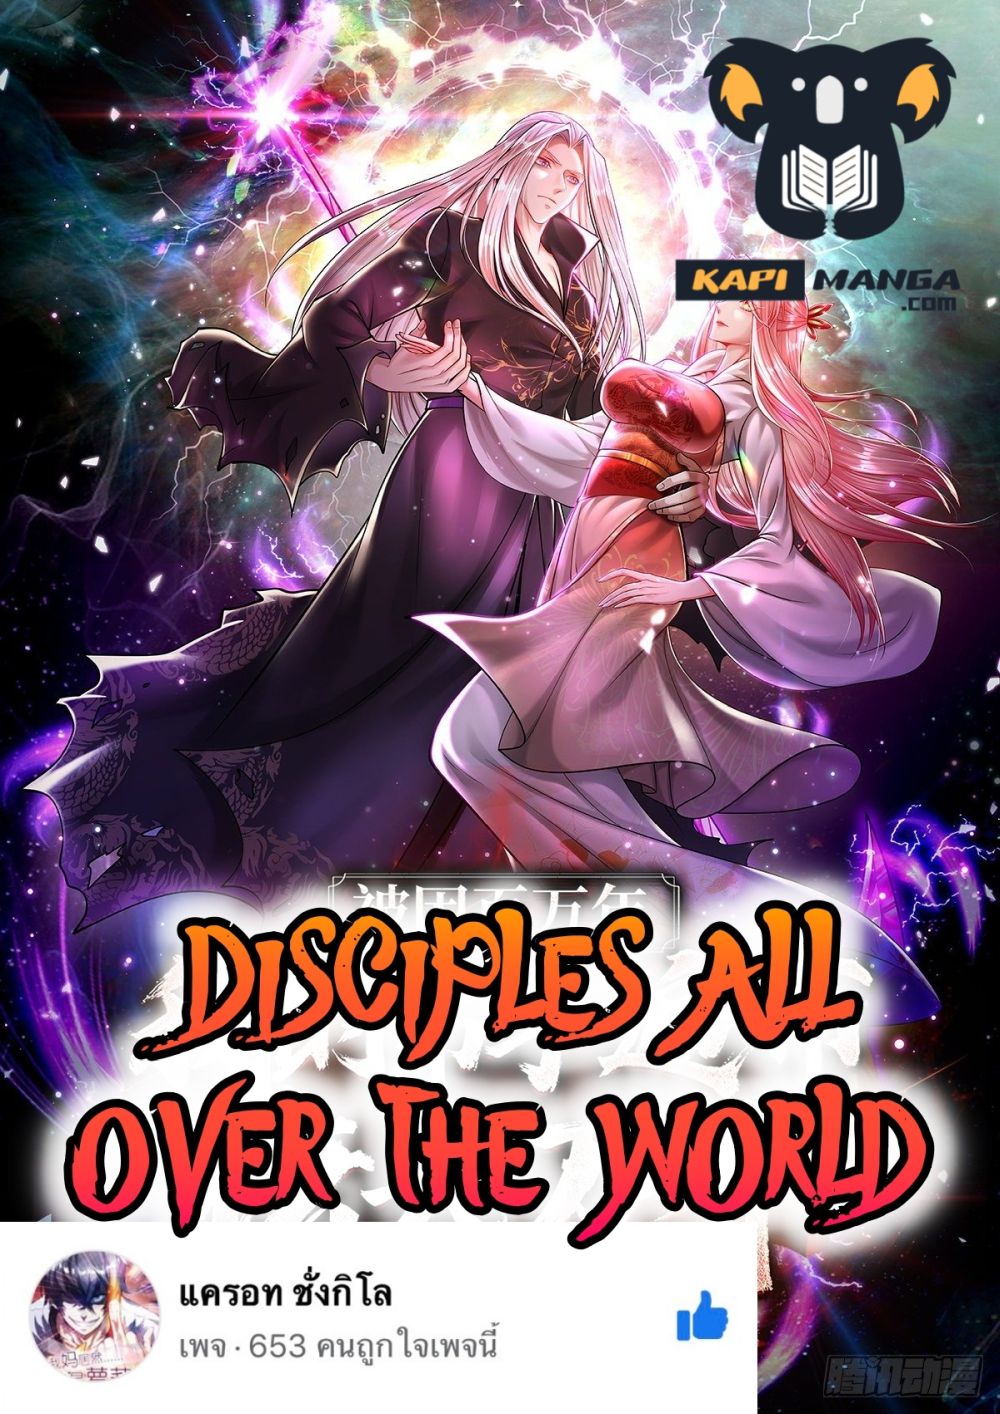 Disciples All Over the World à¸à¸­à¸à¸à¸µà¹ 24 (1)